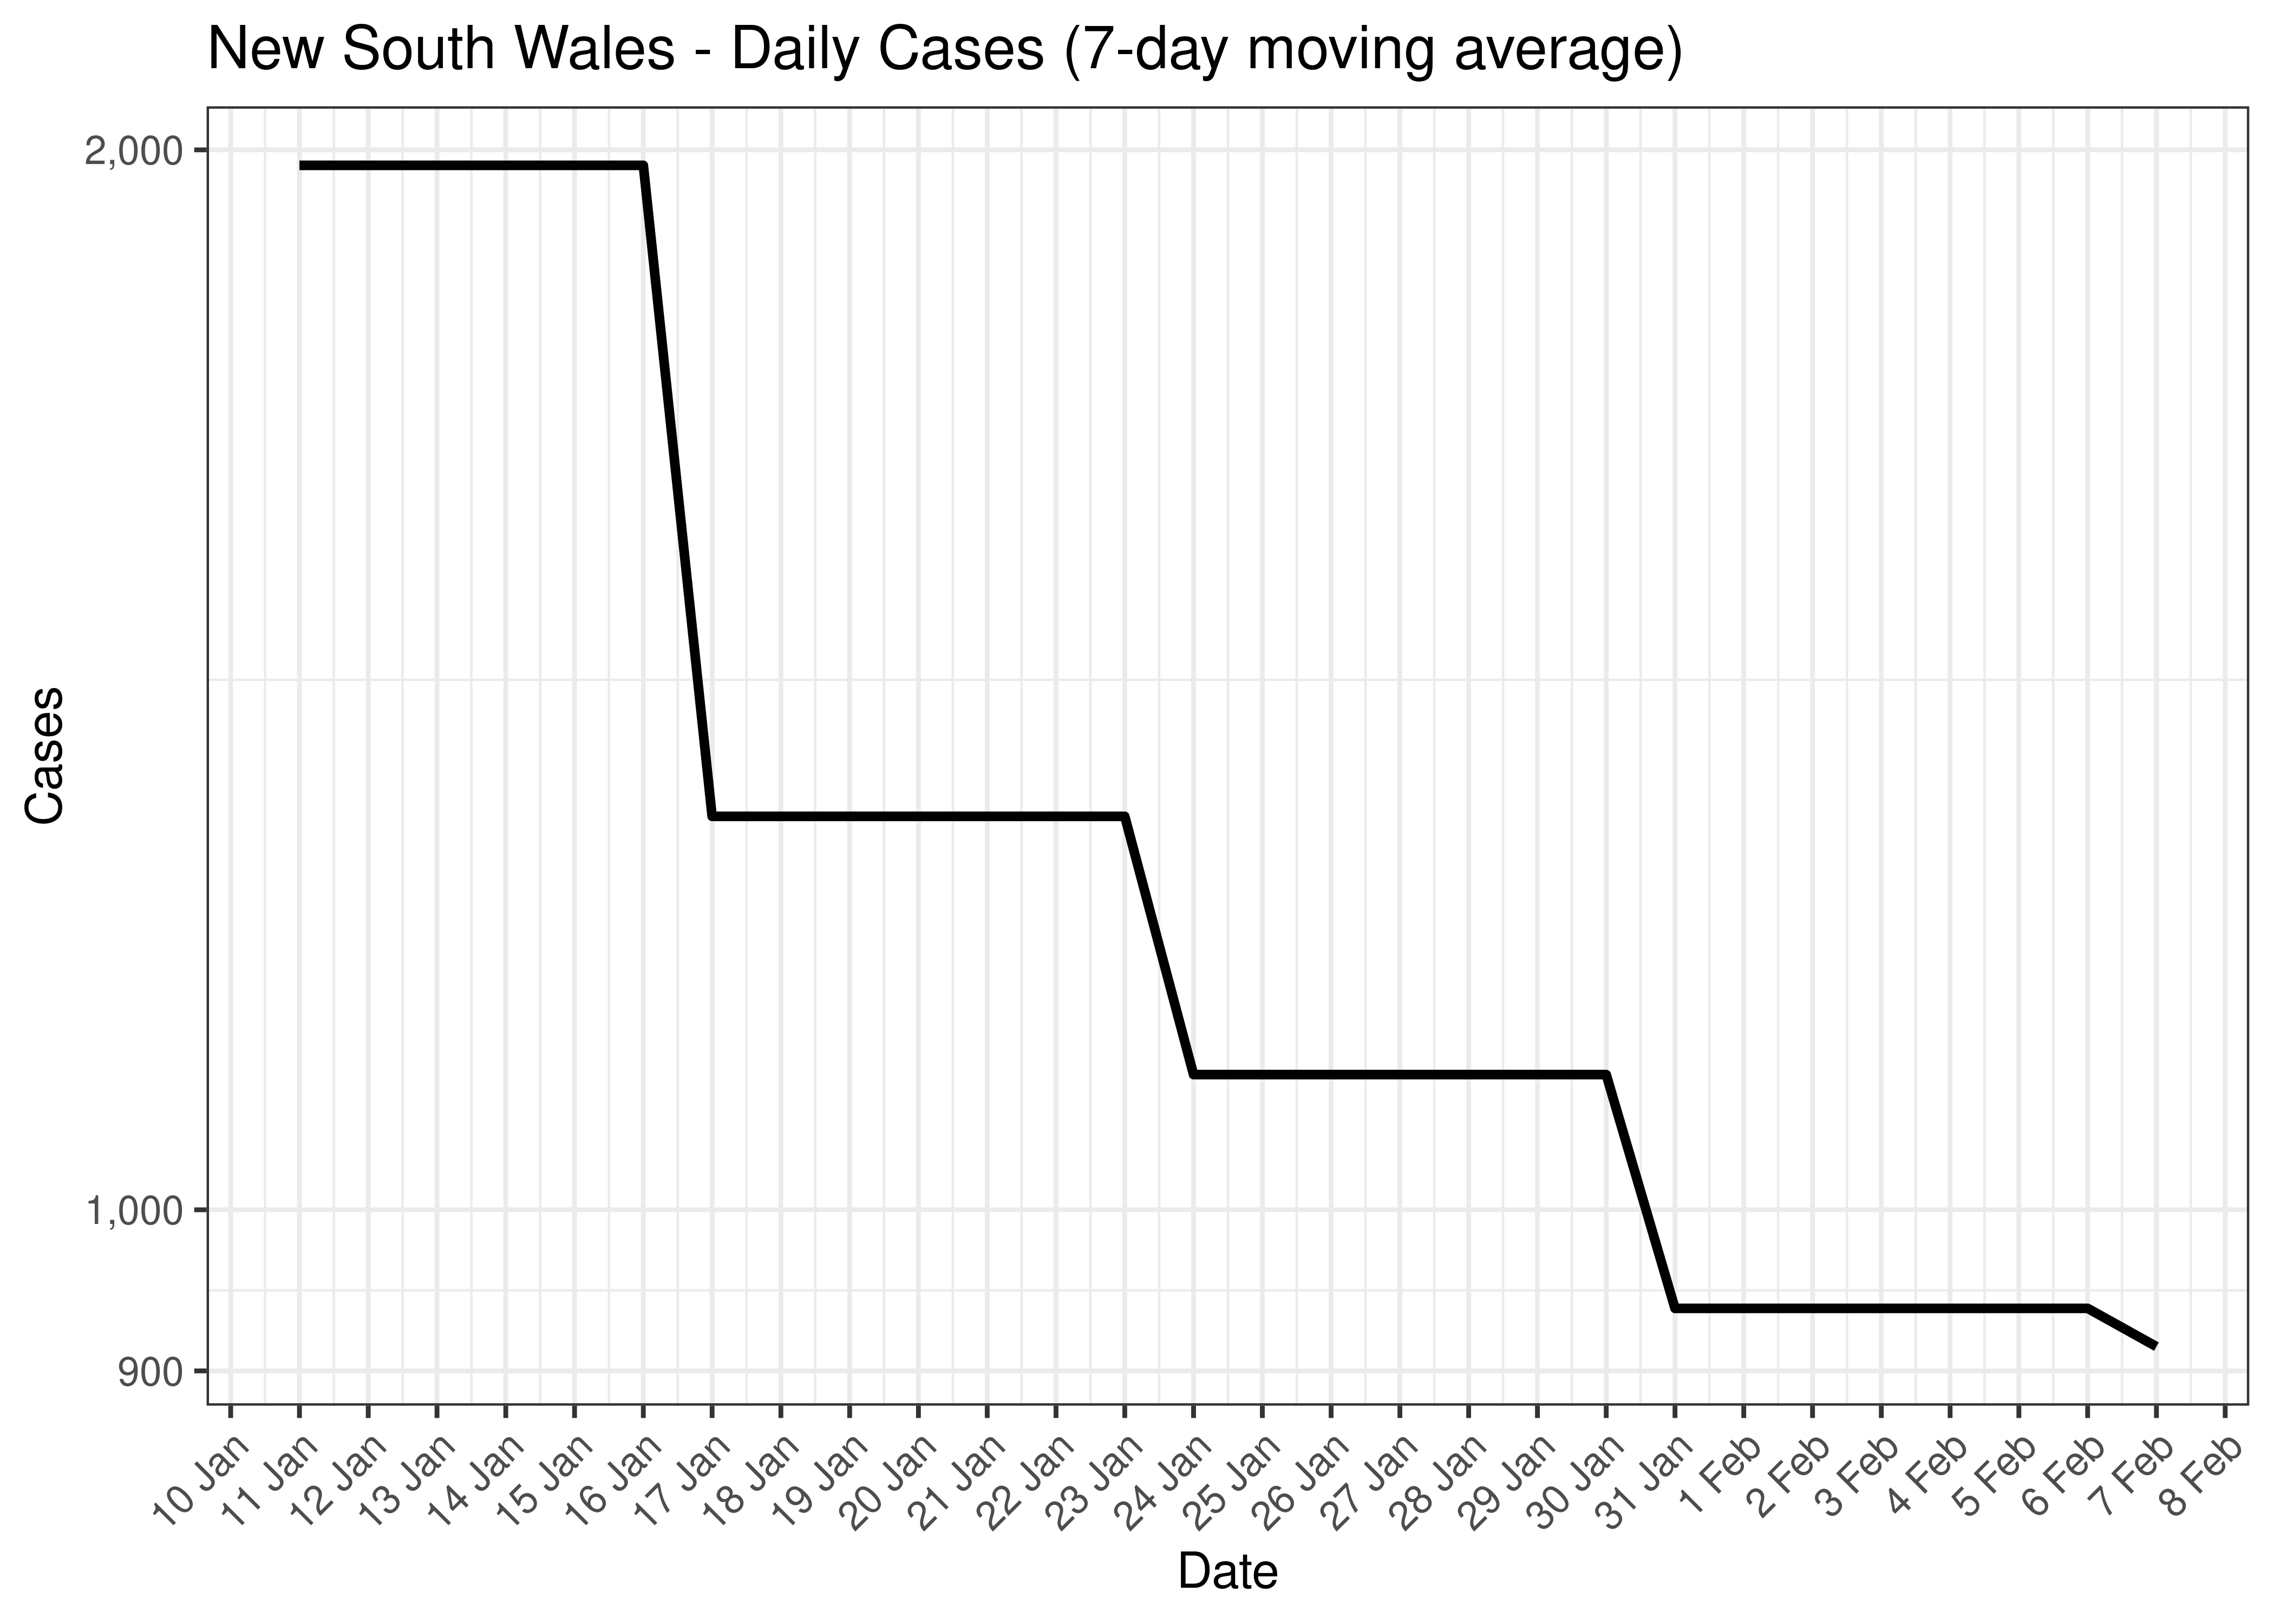 New South Wales - Percentage Testing Positive (7-day moving average)